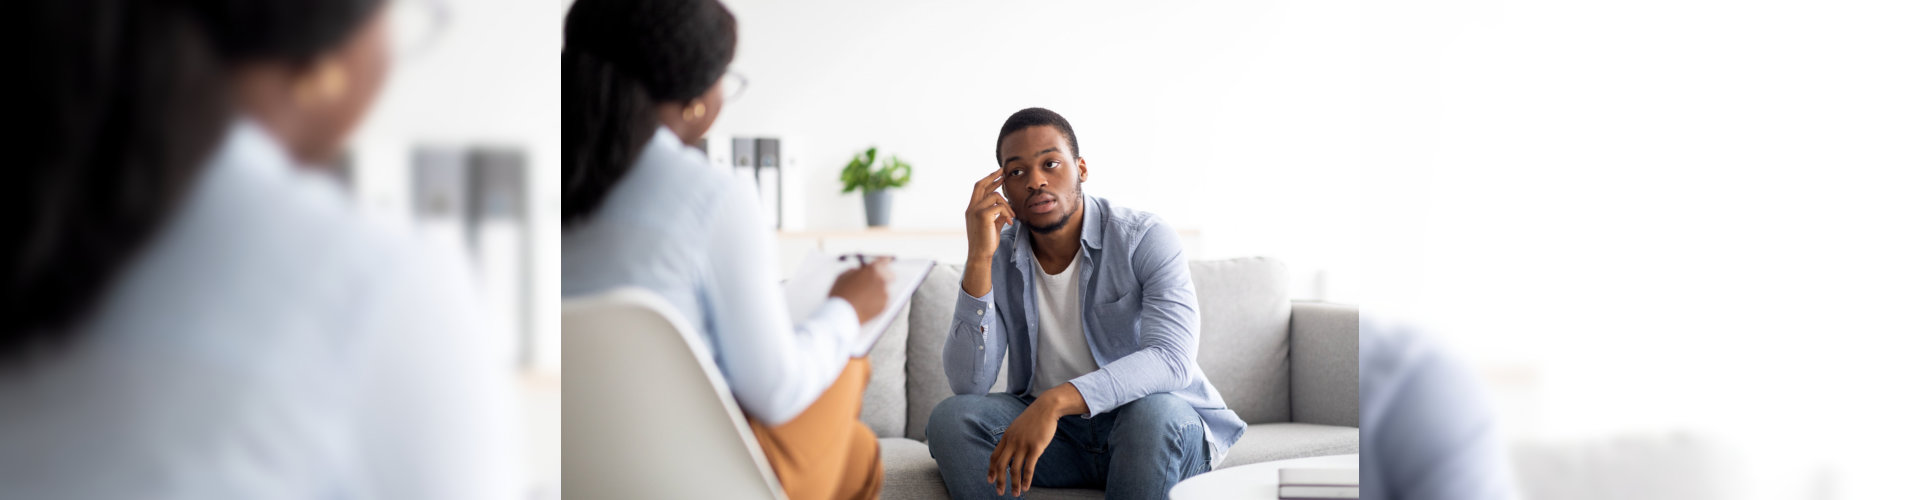 Stressed black man suffering from depression, counselor providing professional assistance at medical office